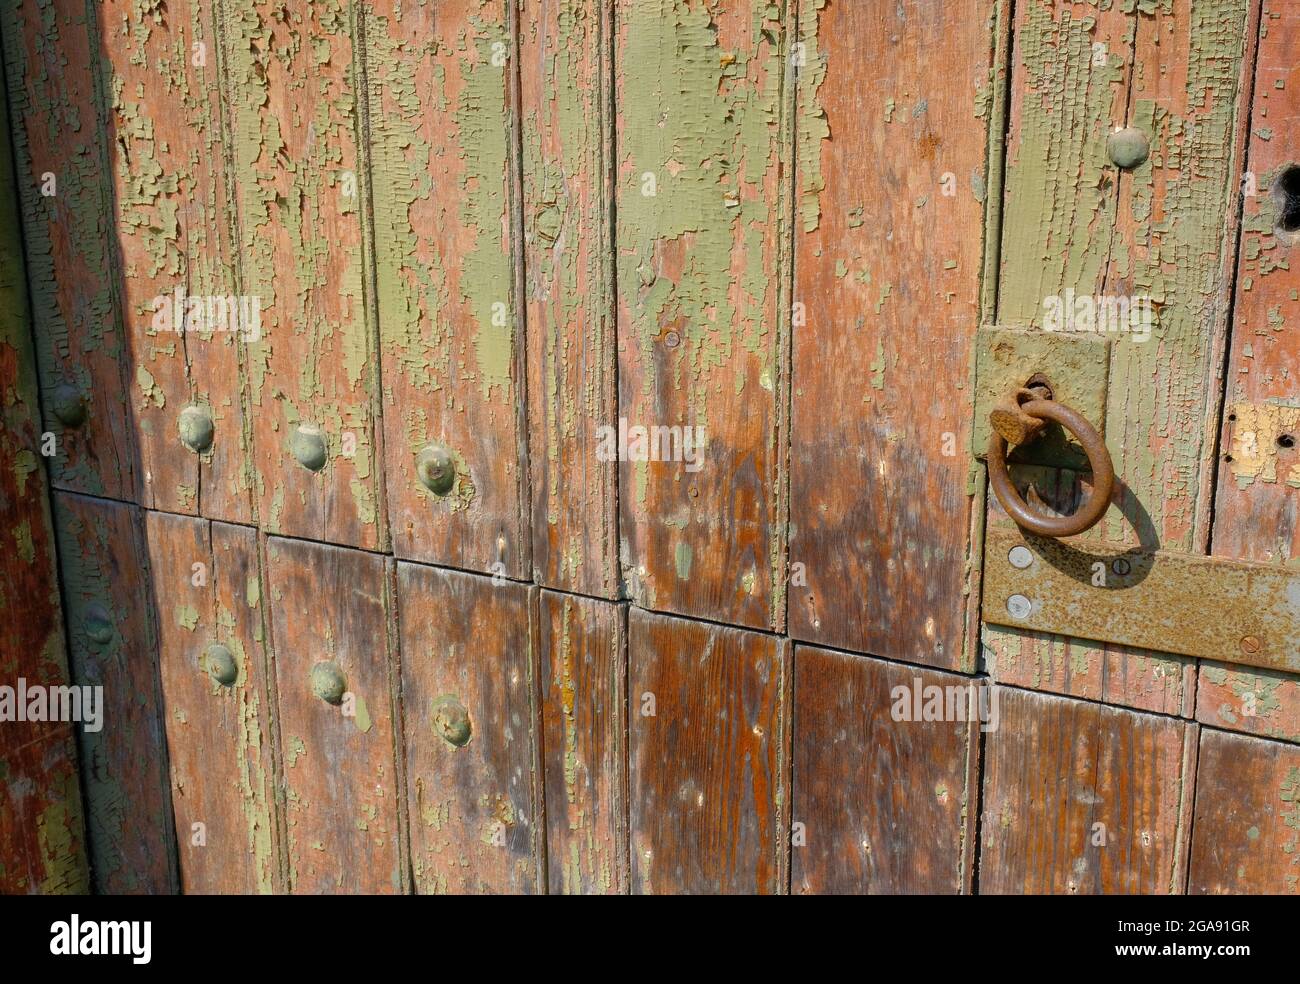 Old wooden door with flaking green paint, bolts and rusted handle. Stock Photo